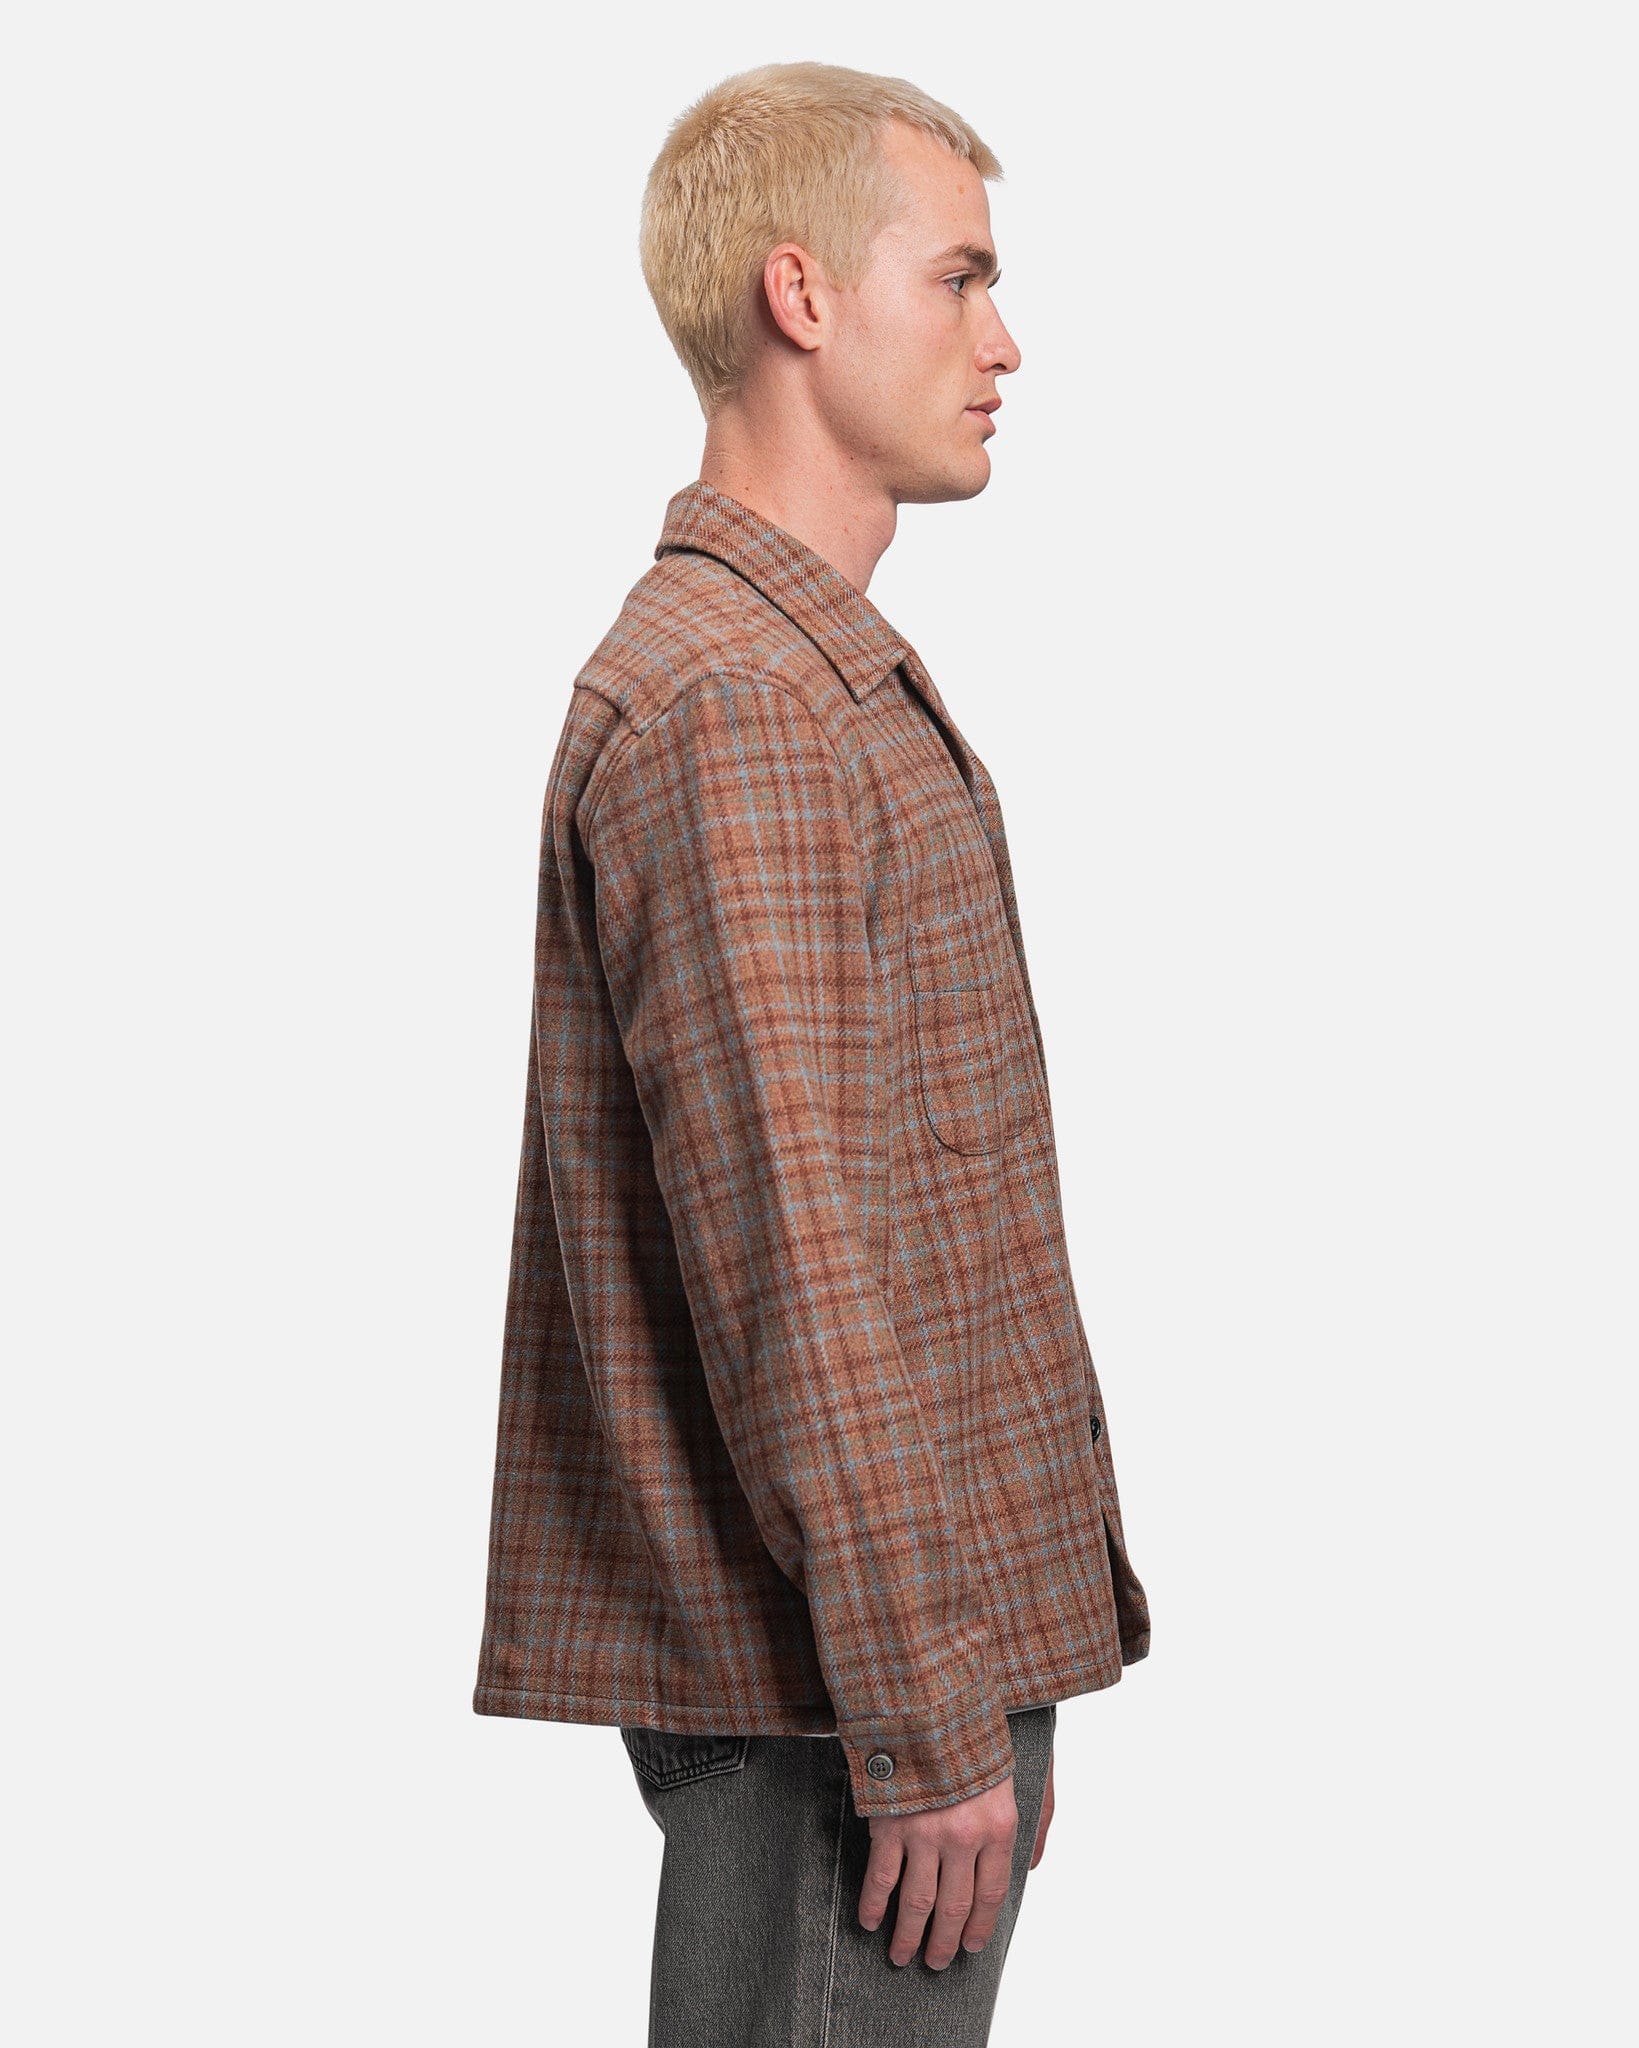 Heusen Shirt in Rust Check Country Wool